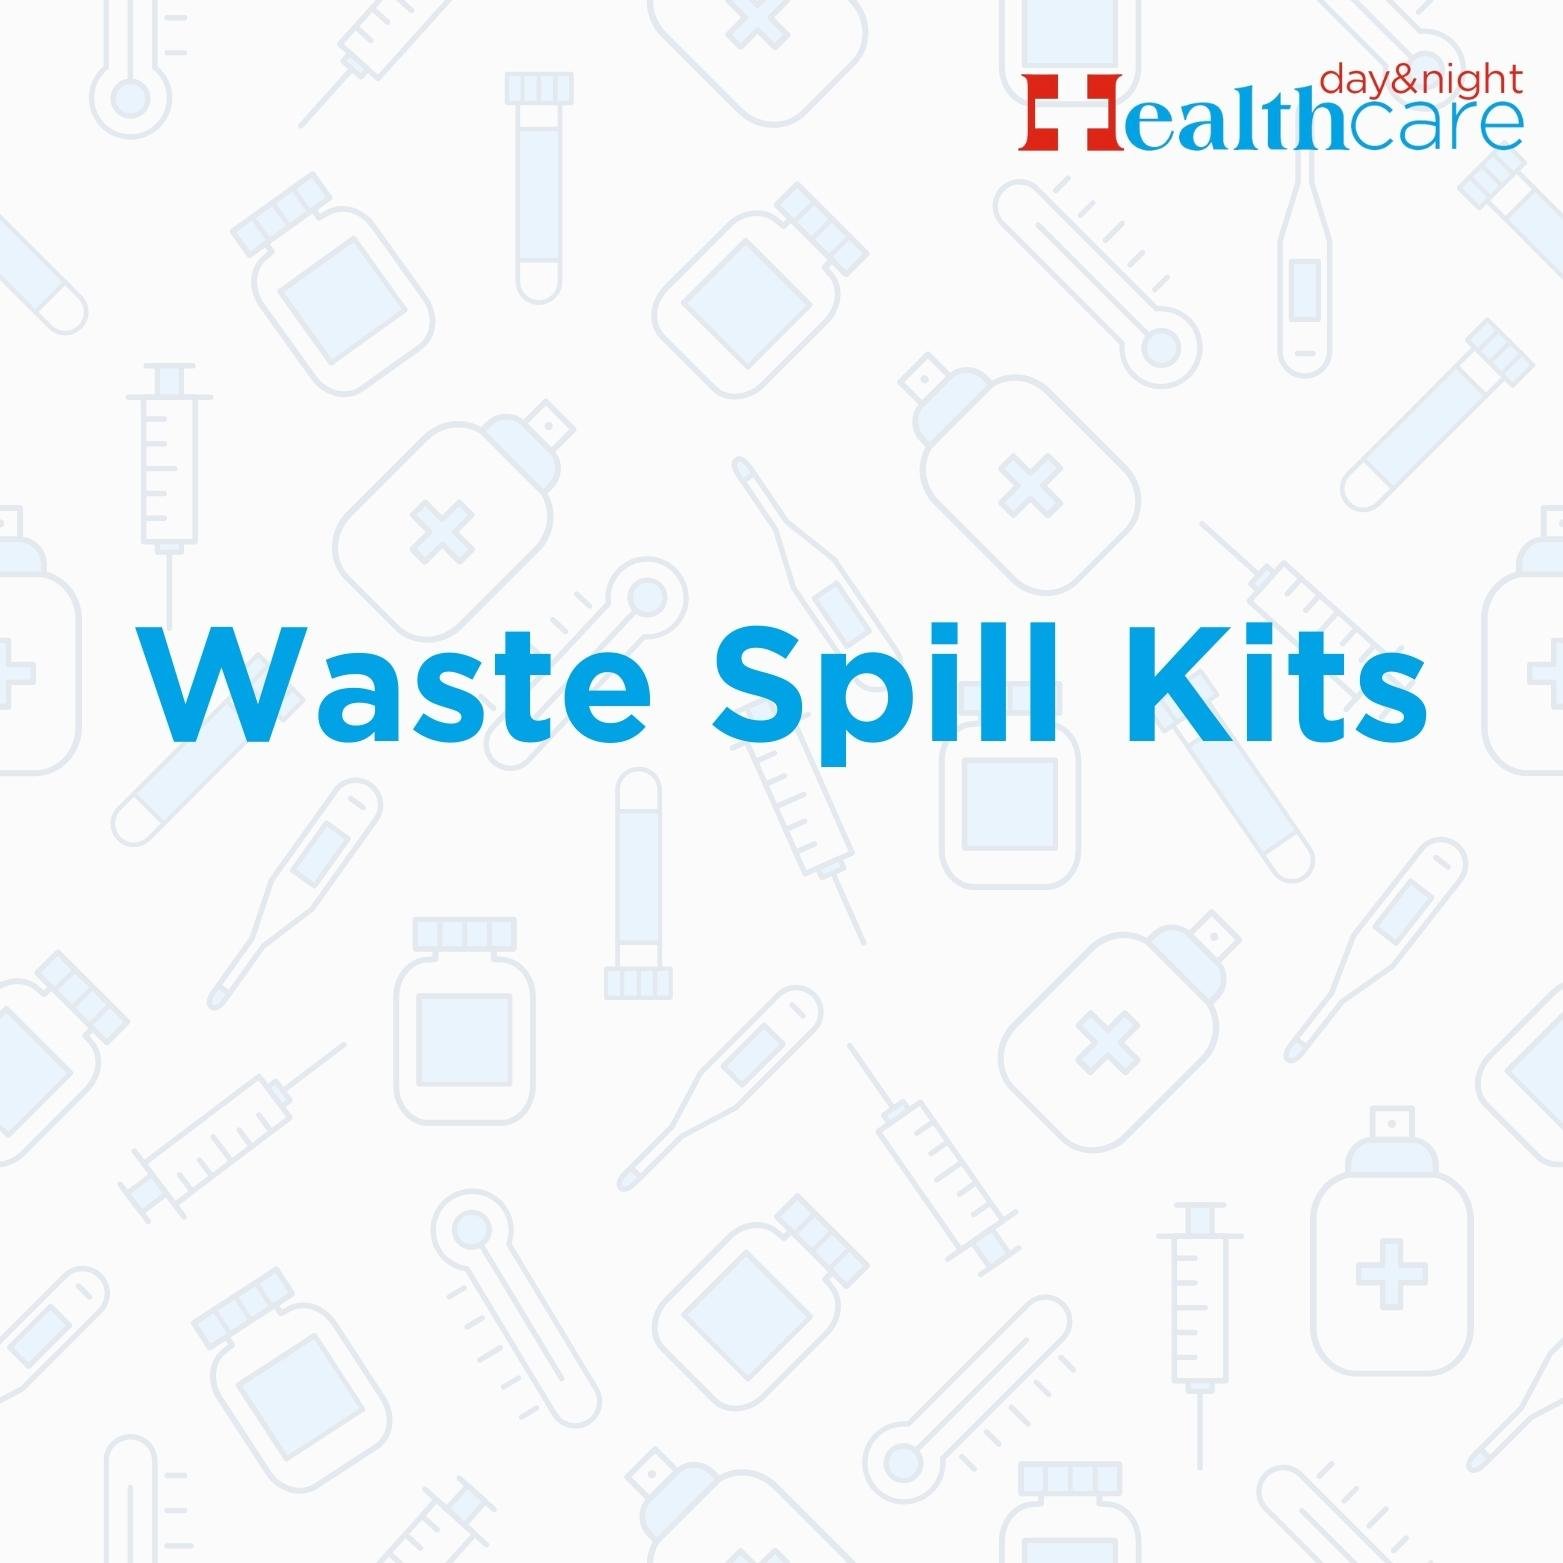 Waste Spill Kits